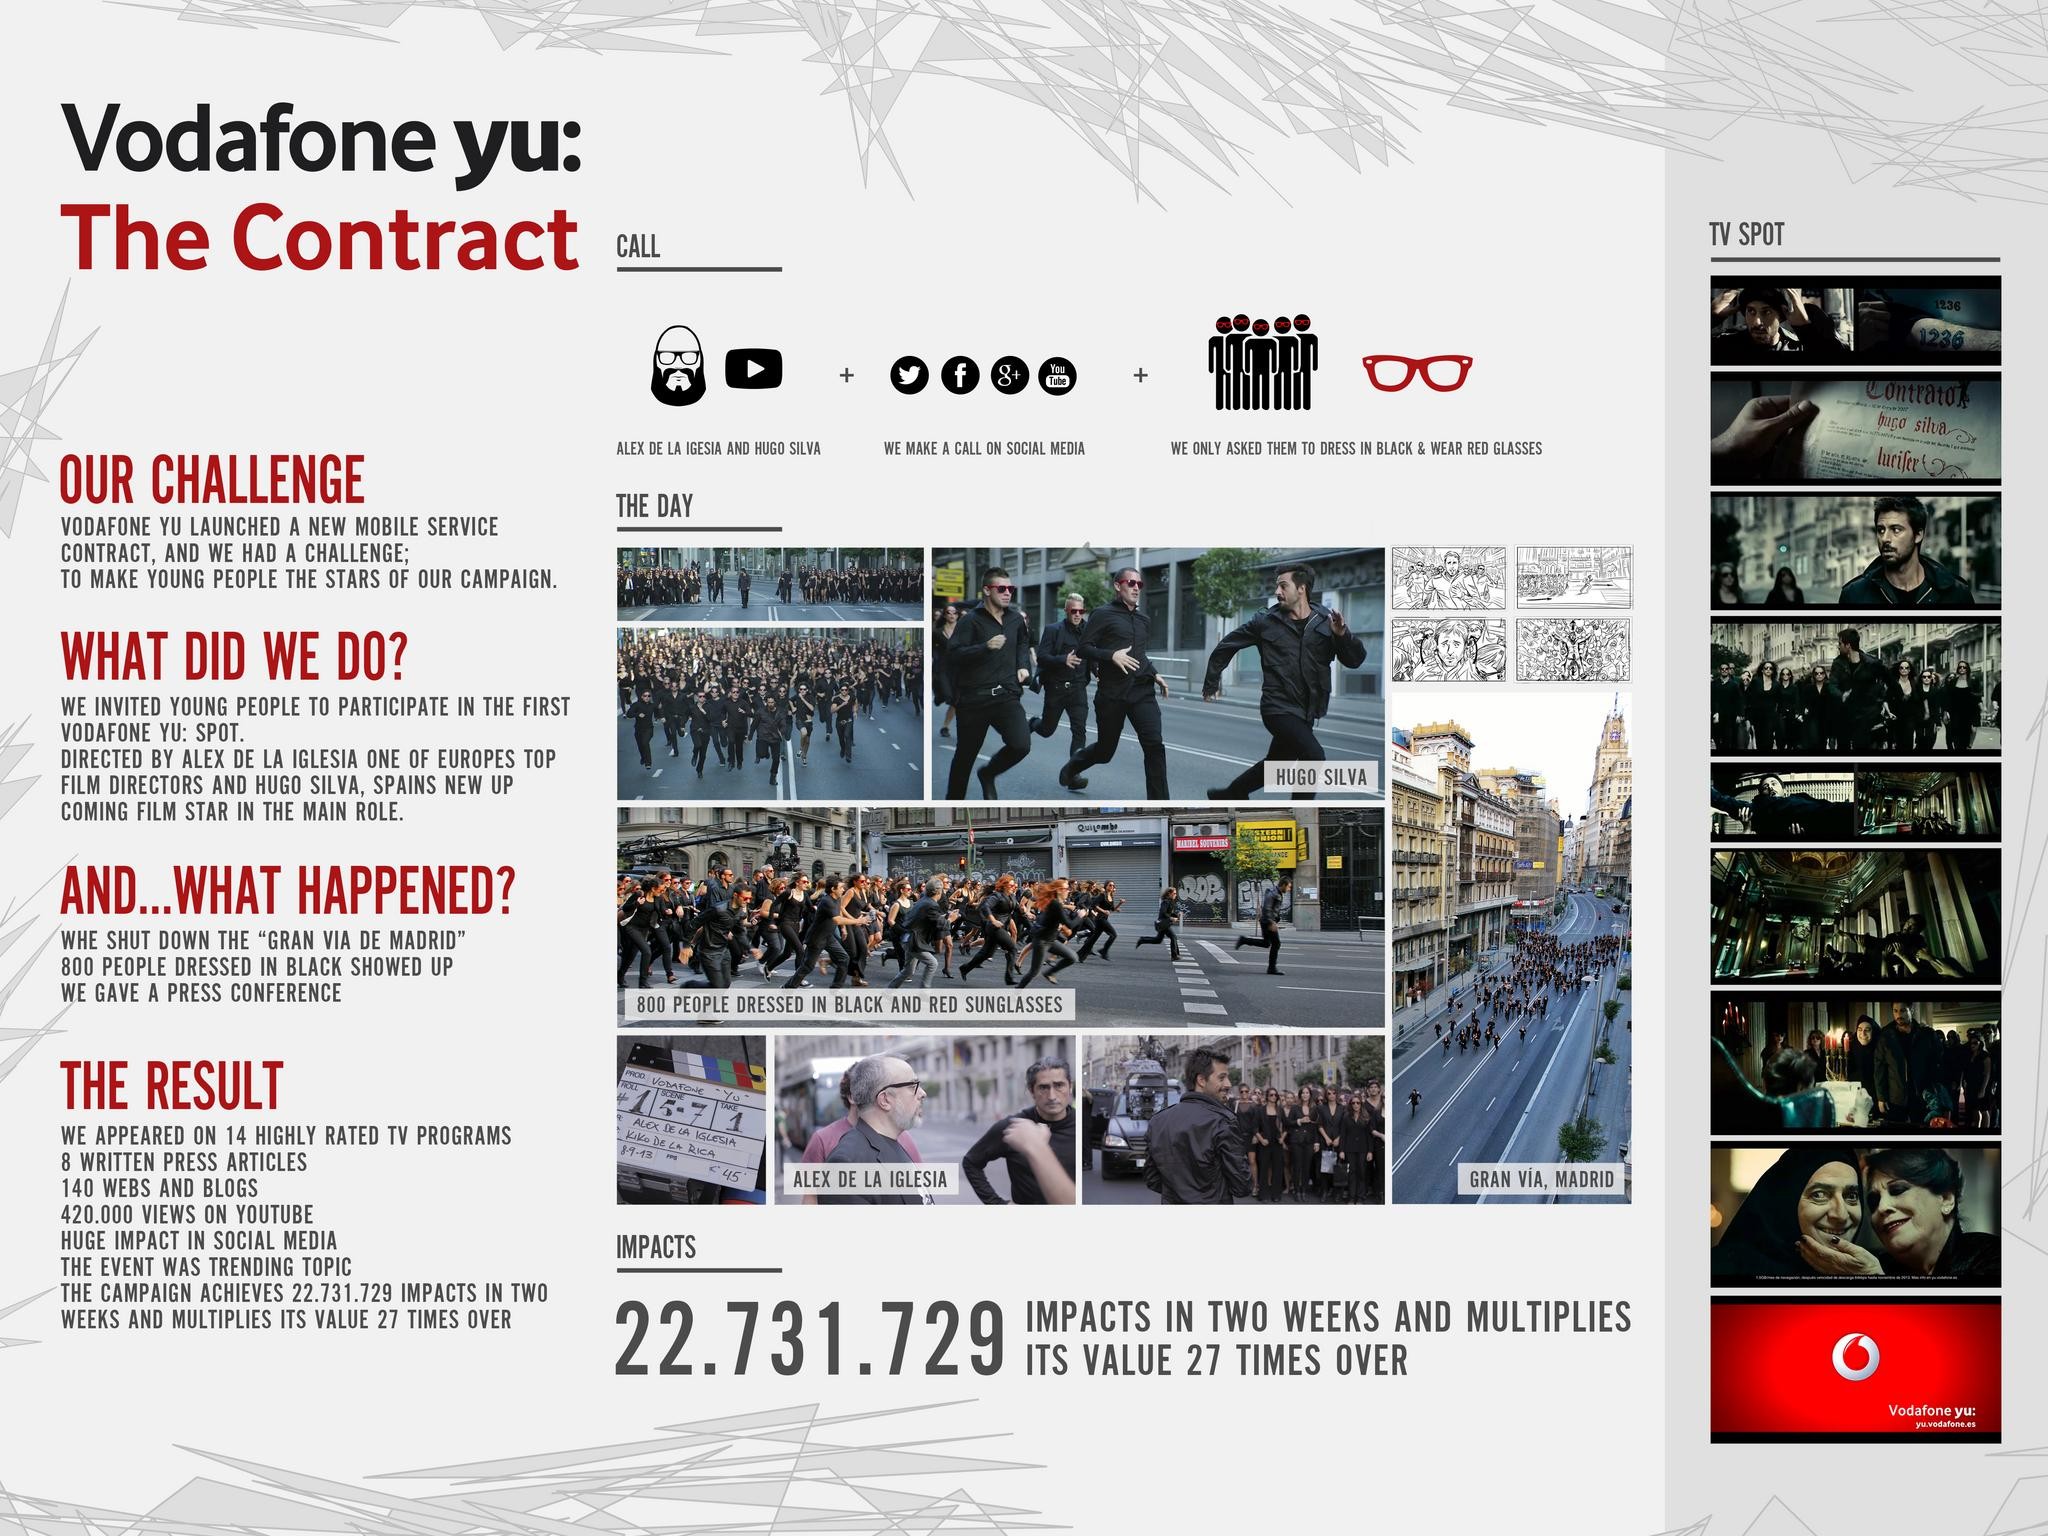 VODAFONE YU: THE CONTRACT